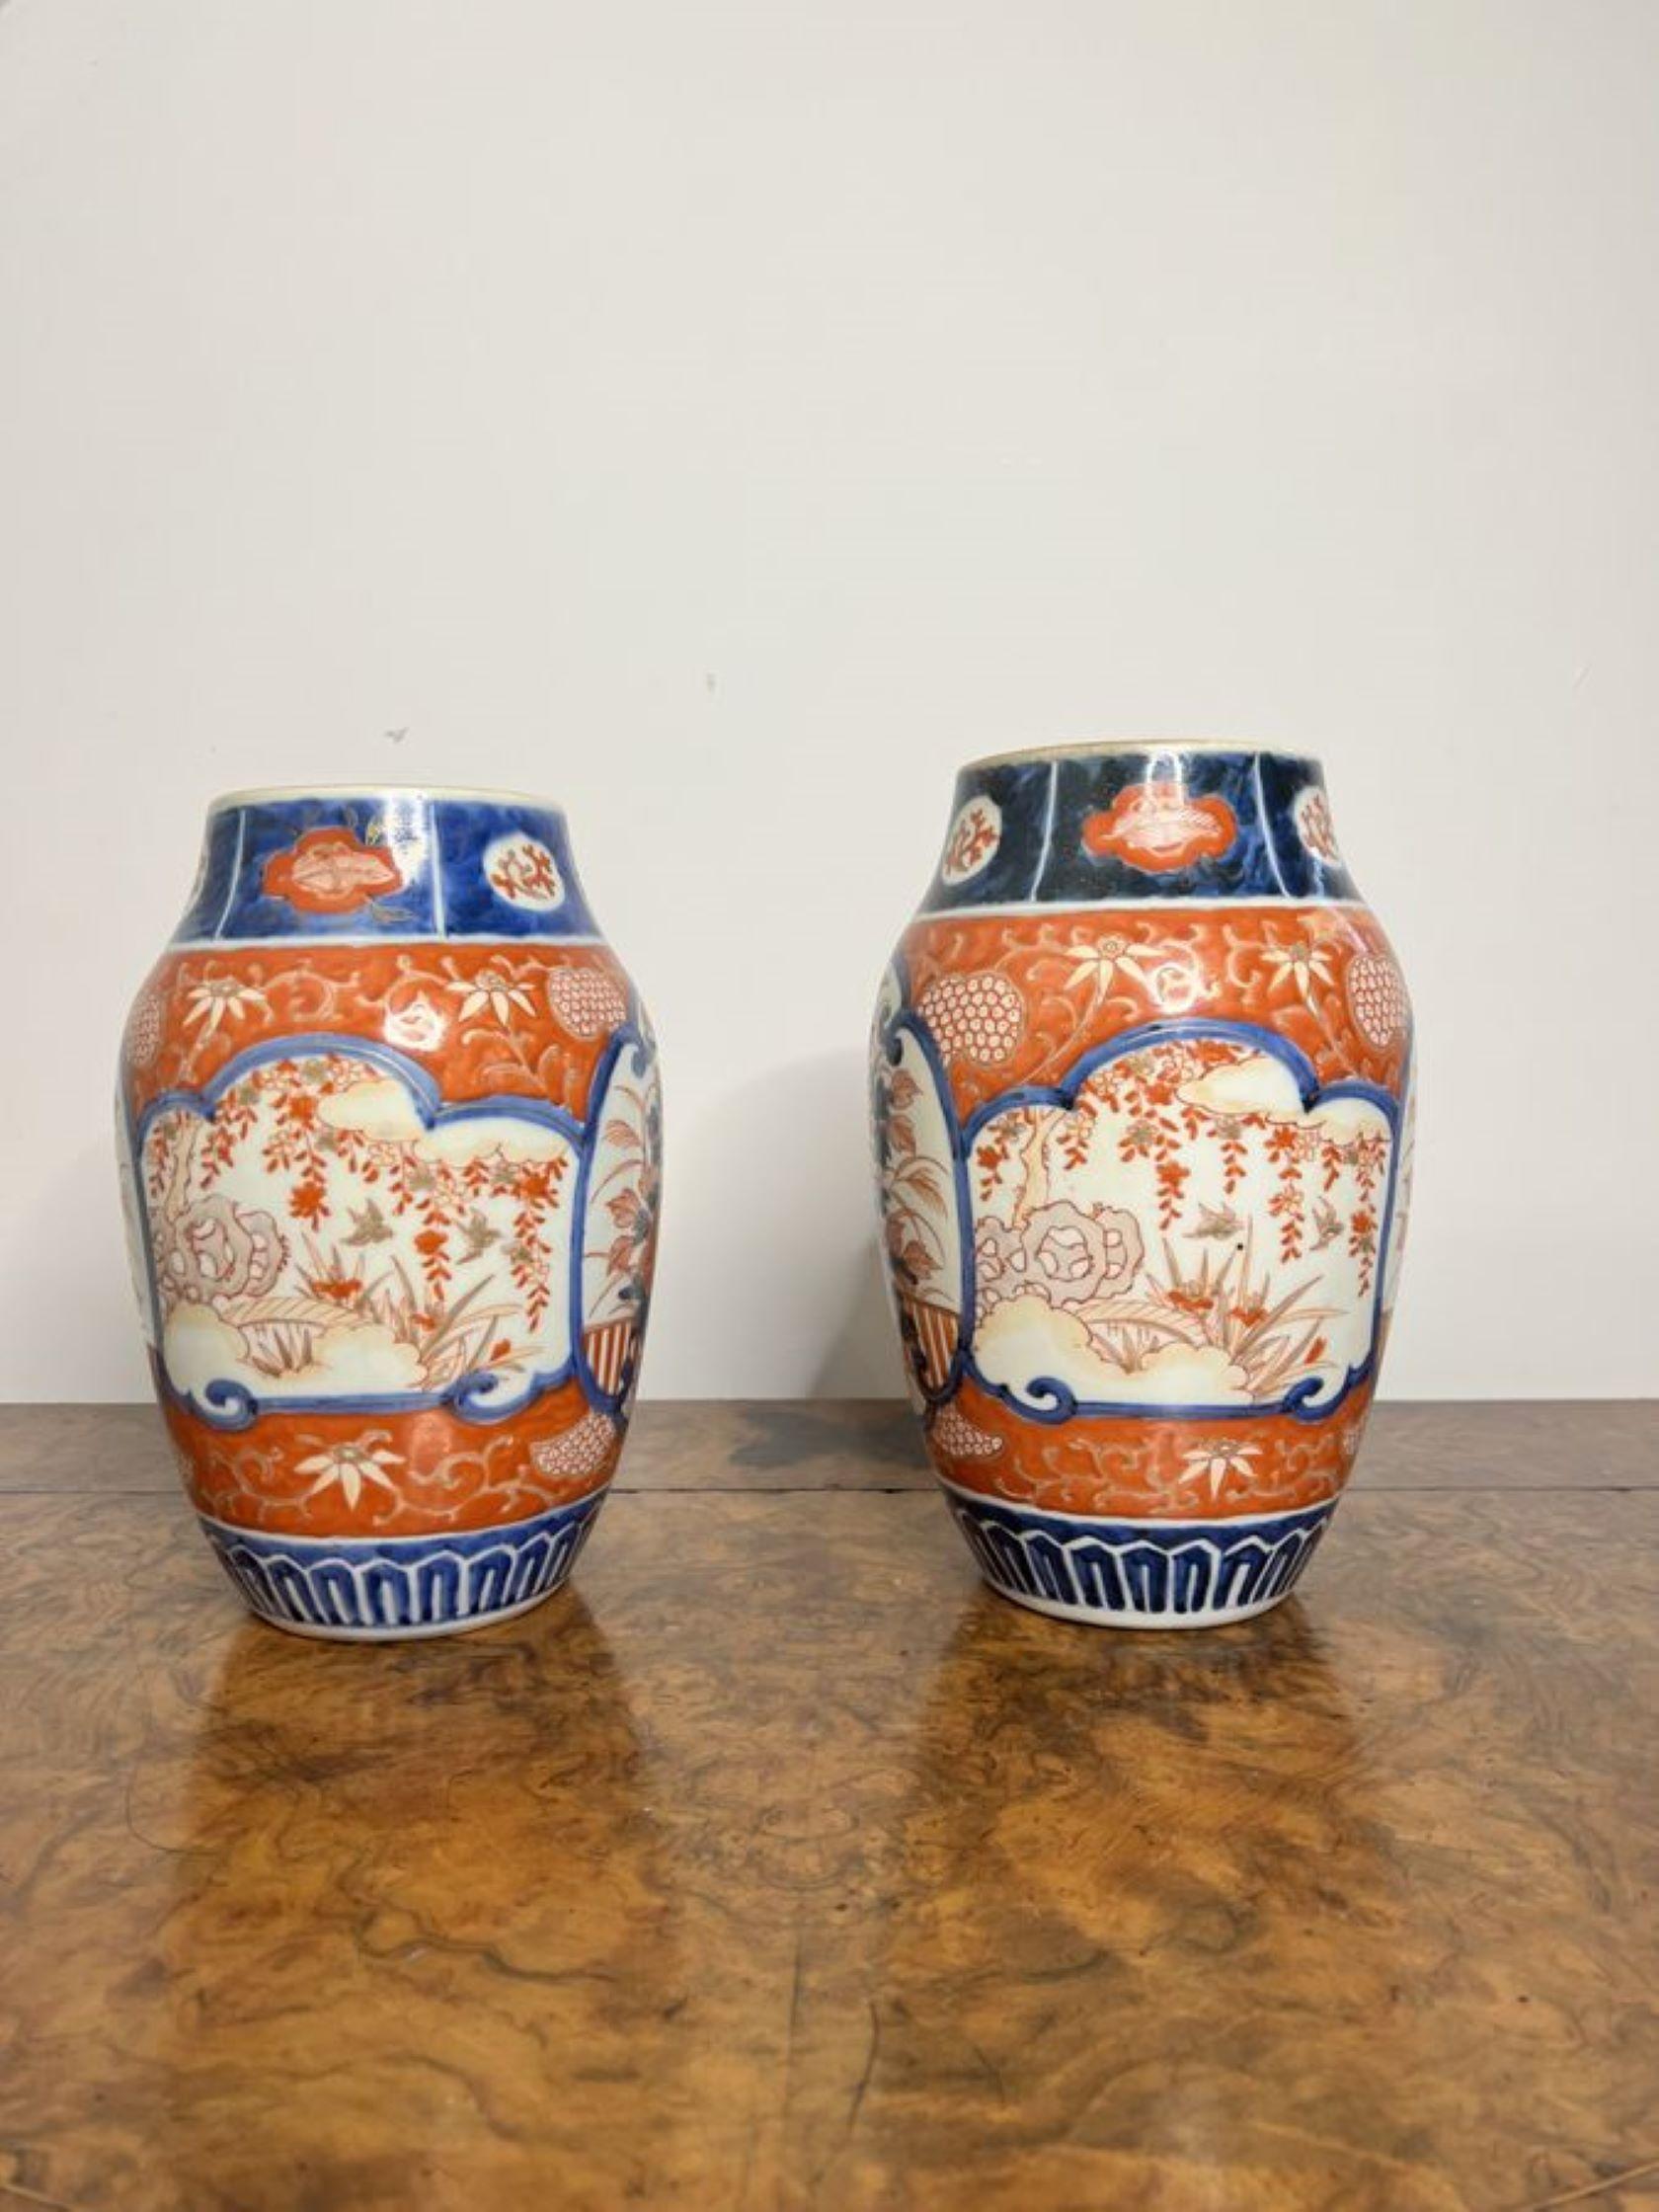 Quality pair of antique Japanese imari vases having a quality pair of shaped Japanese imari vases decorated with panels with flowers, leaves, trees, birds and patterns hand painted in wonderful red, blue and with colours. 

D. 1900